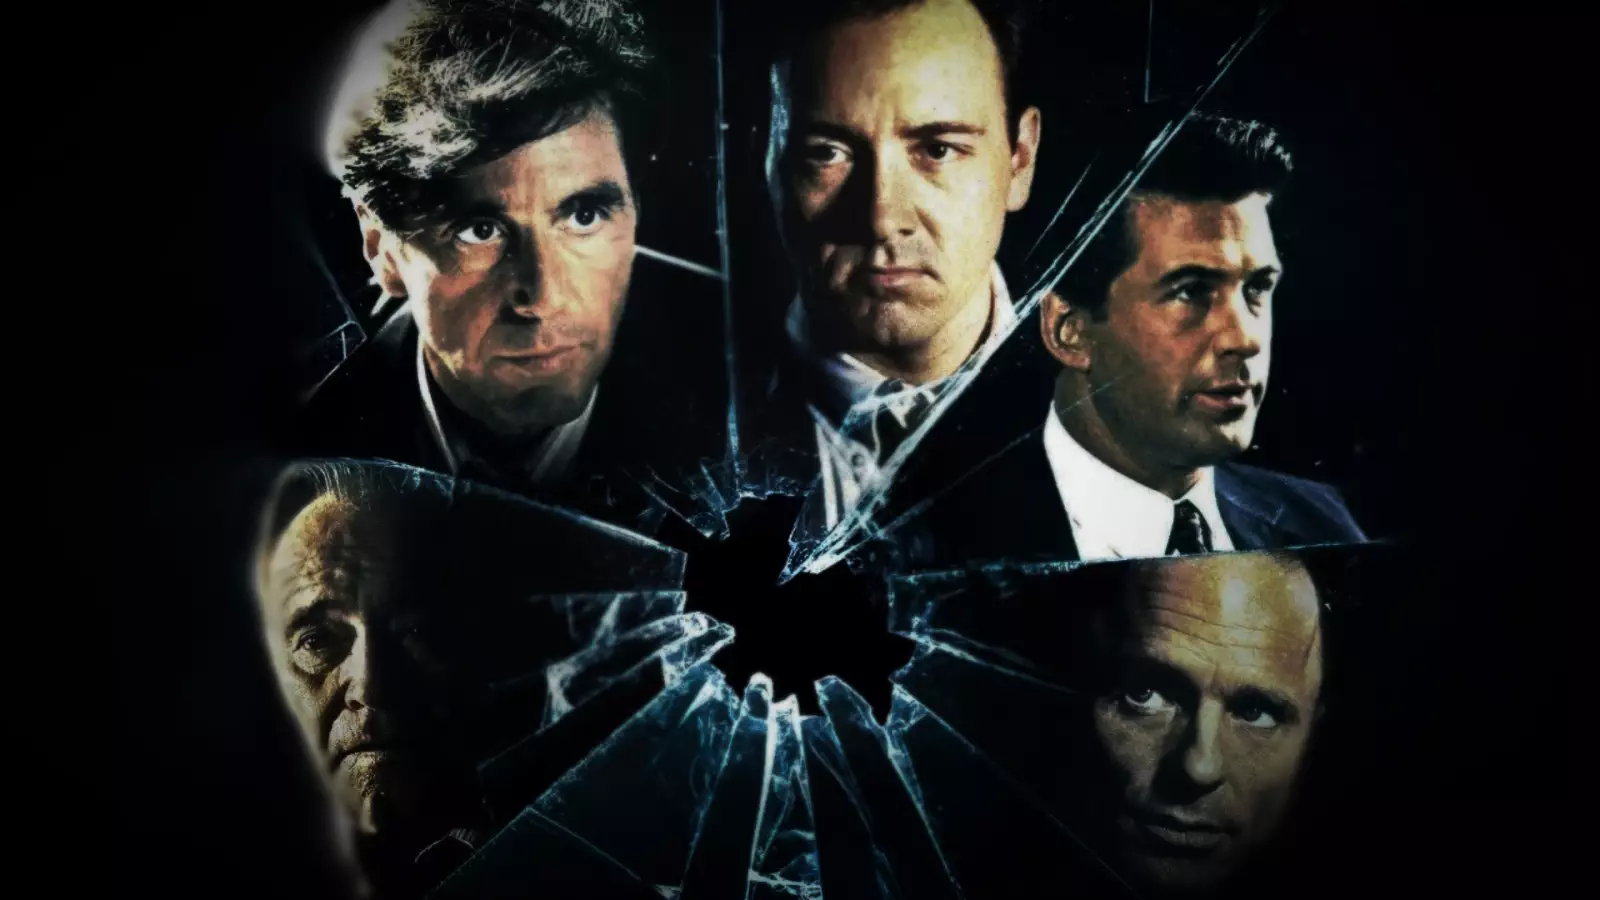 No Effects, No Set Pieces, Just Exceptional Acting: Glengarry Glen Ross Revisited